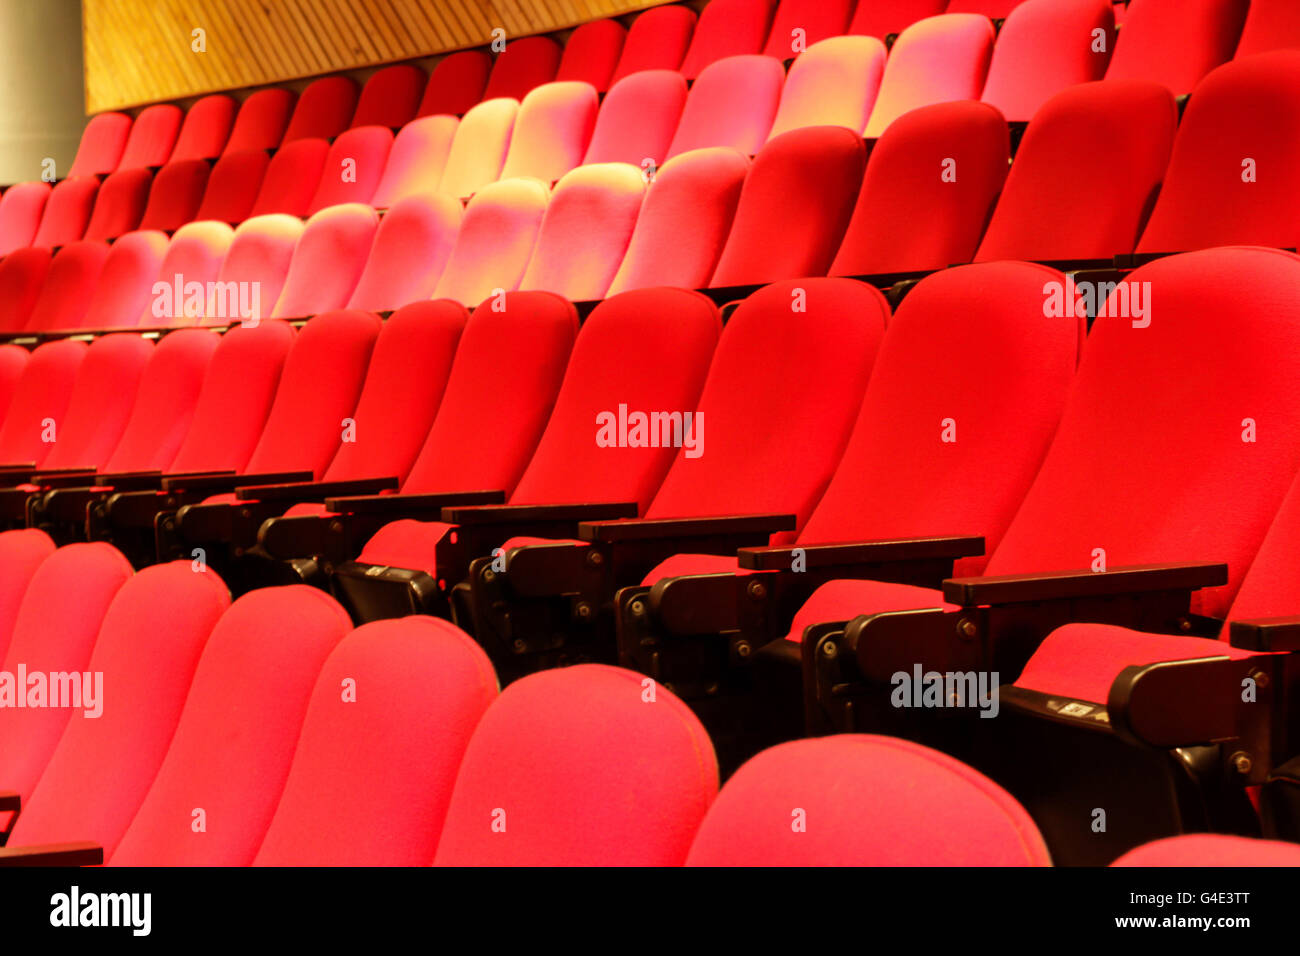 Photograph of some empty red theater seats Stock Photo